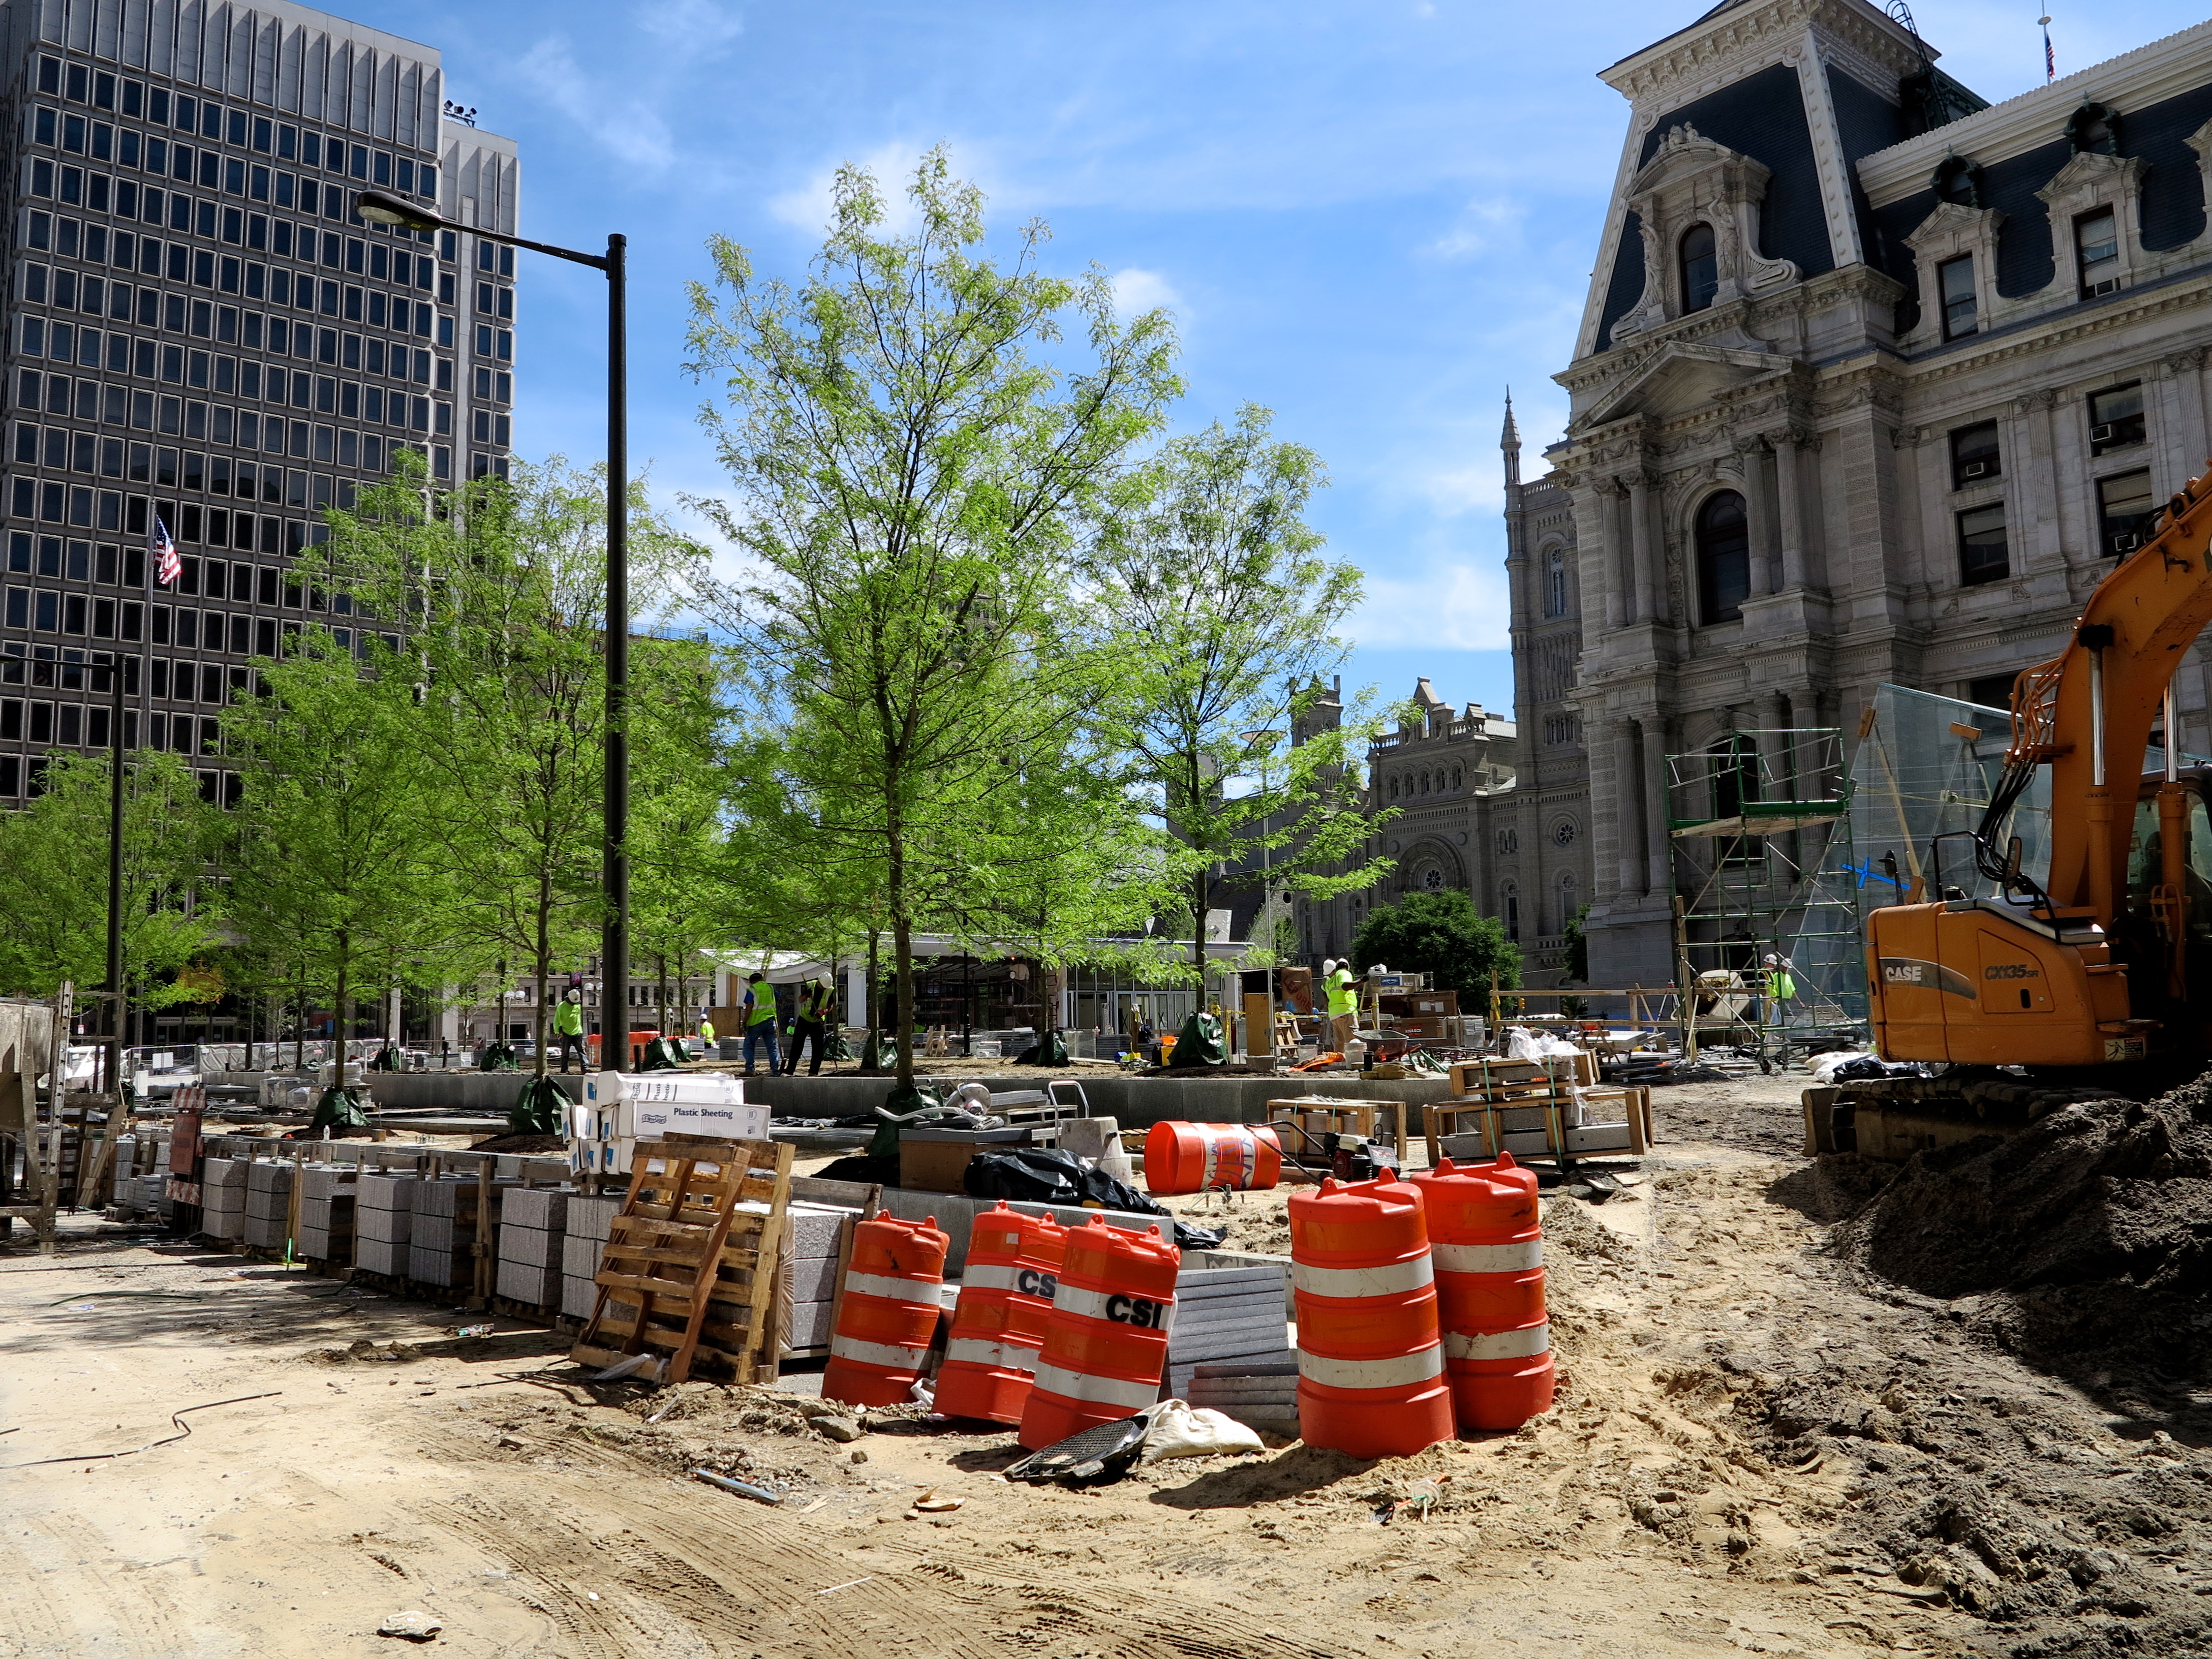 Trees planted at Dilworth Plaza, June 2014